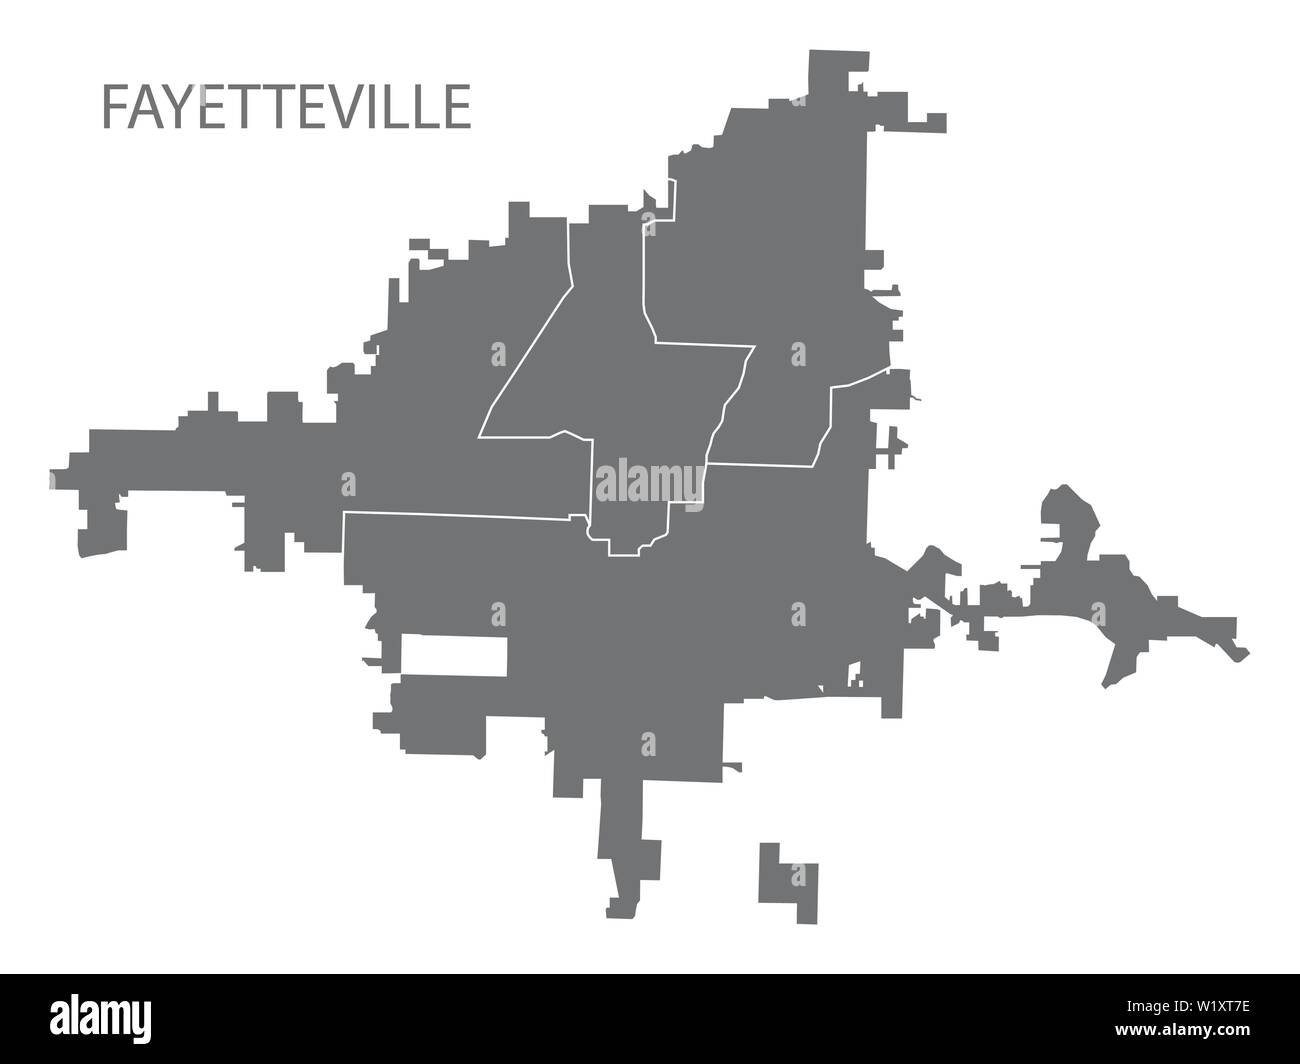 Fayetteville North Carolina city map with wards grey illustration silhouette shape Stock Vector